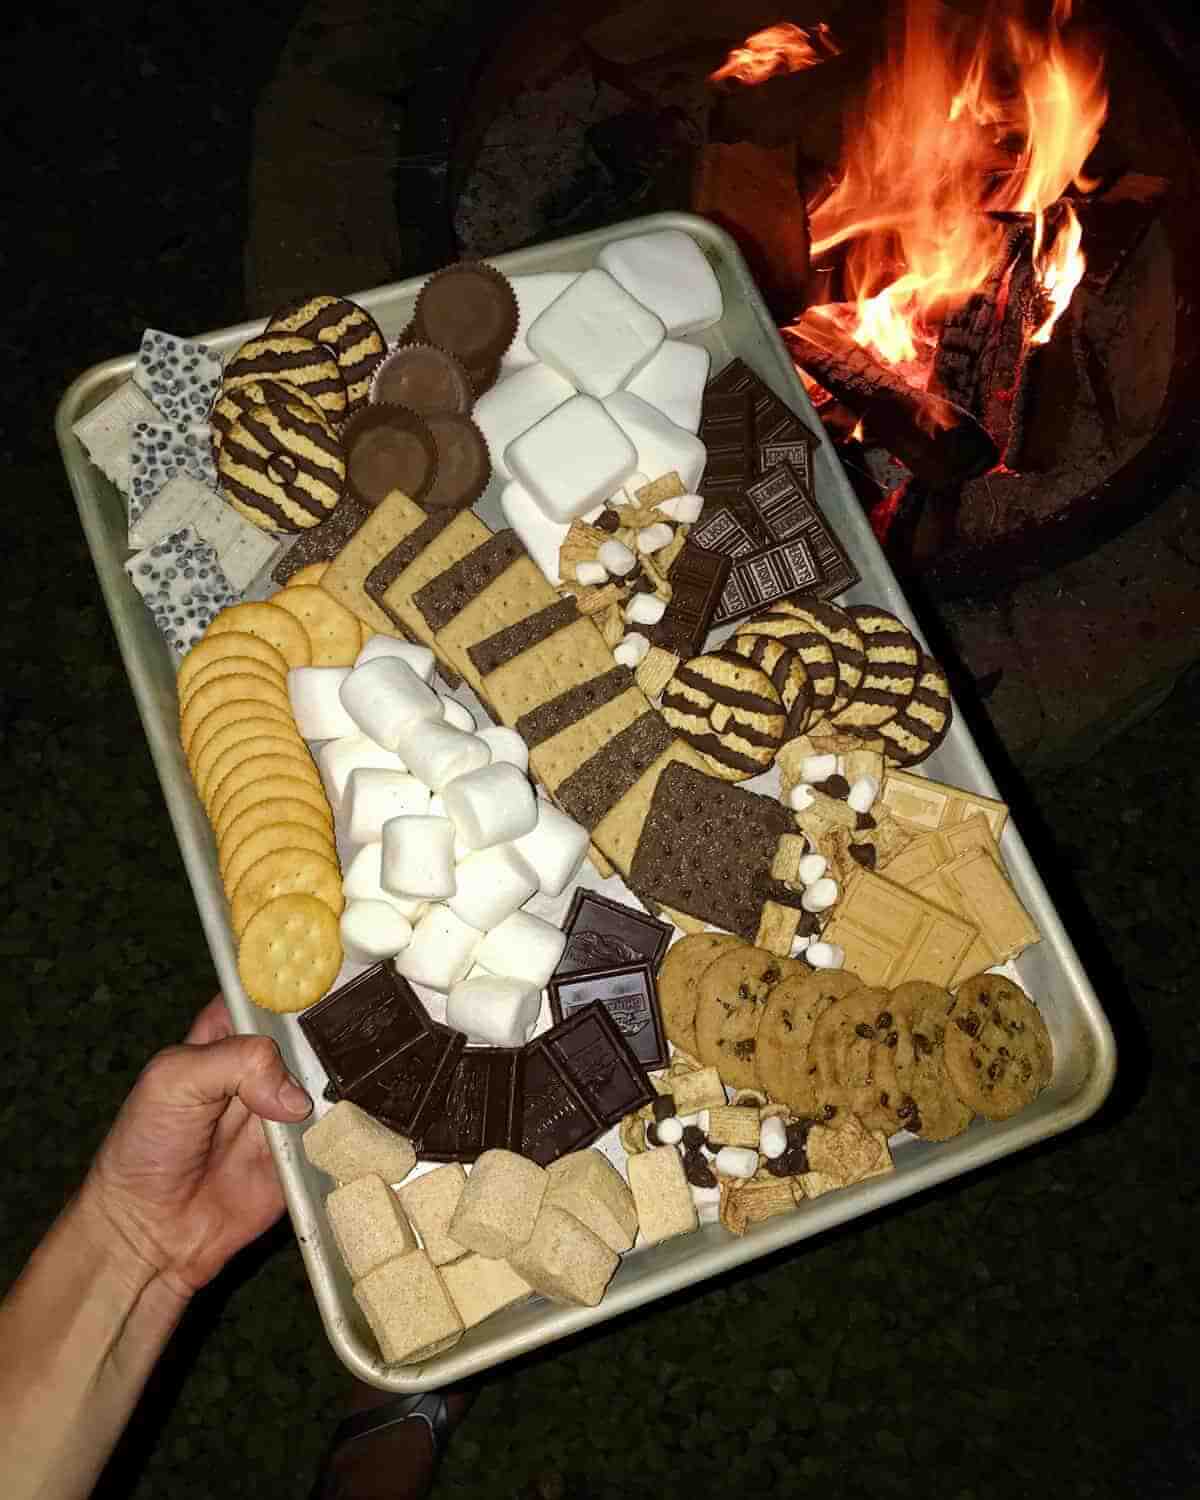 Third Must-Have - S'mores Ingredients (and roasting sticks for the marshmallows!)